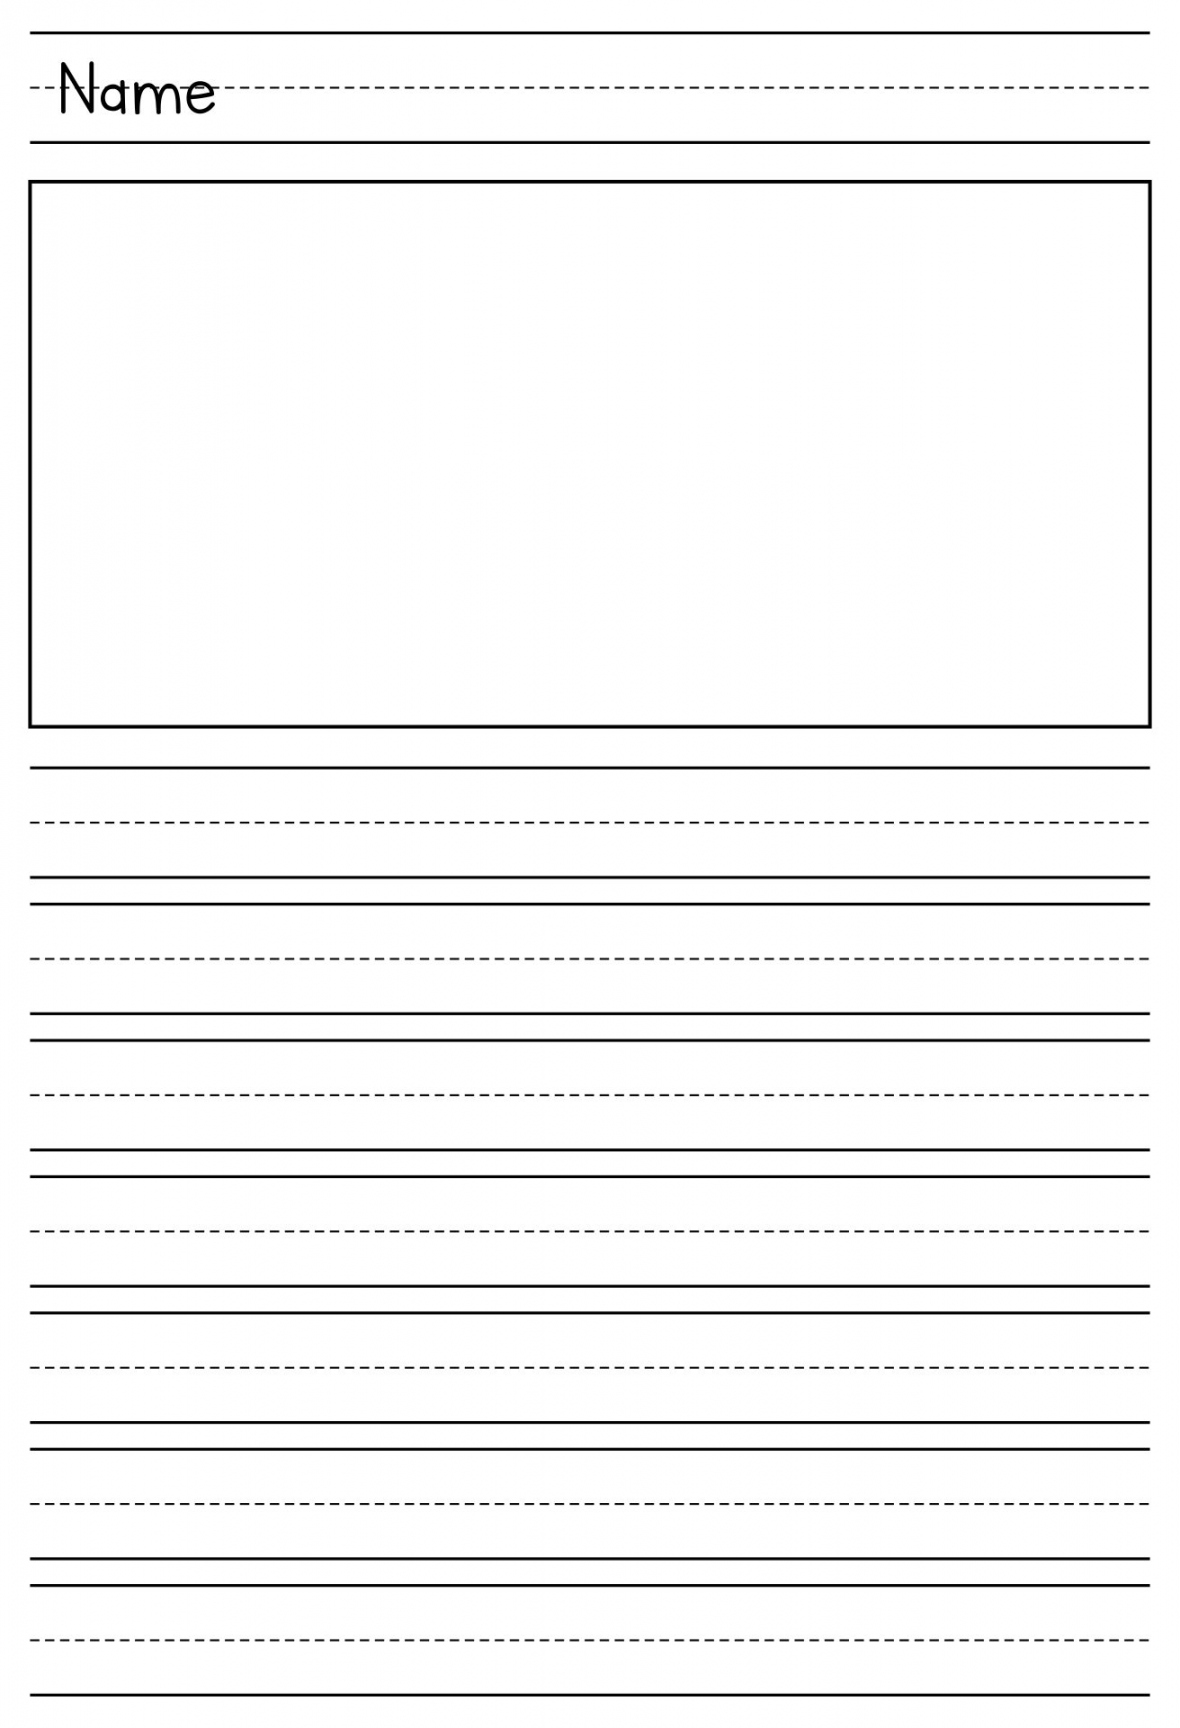 Best Printable Primary Writing Paper Template - printablee - Handwriting Paper Free Printable